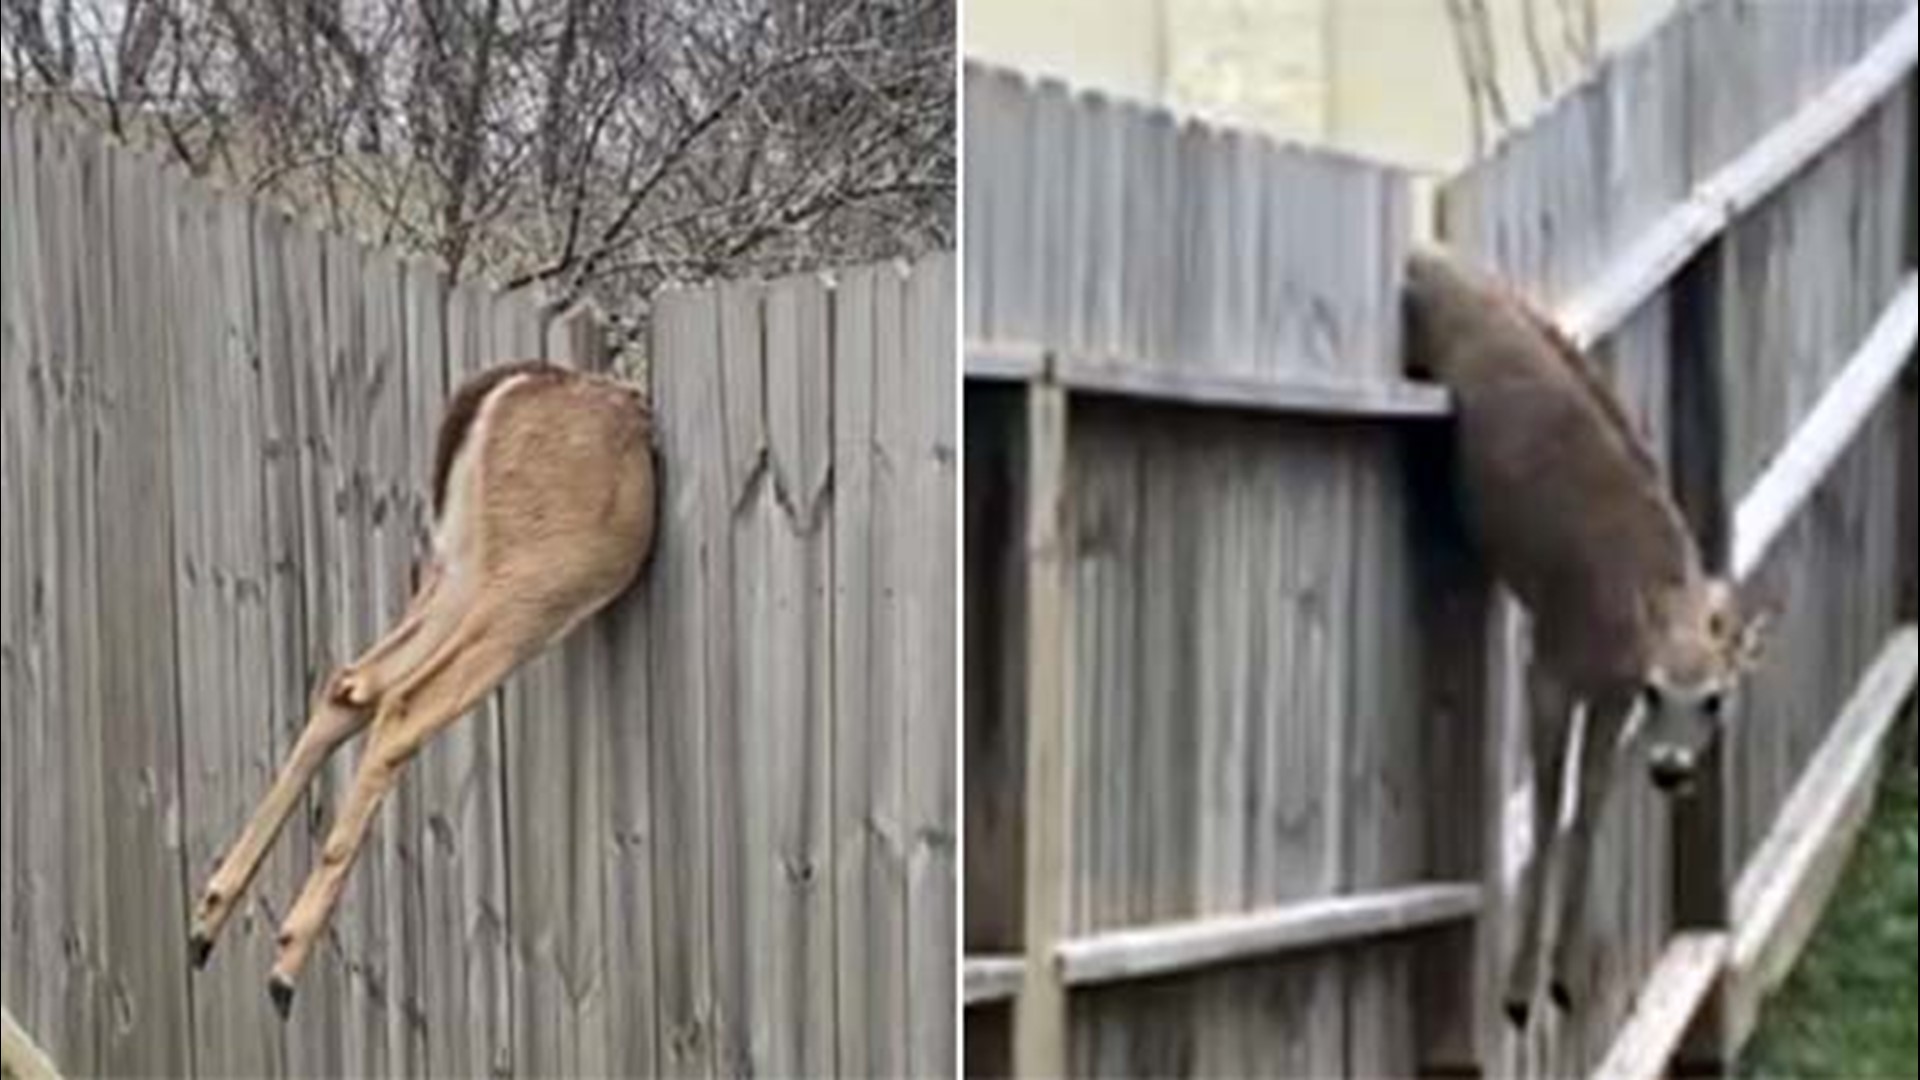 The deer was apparently trying to jump over the fence when it became stuck.